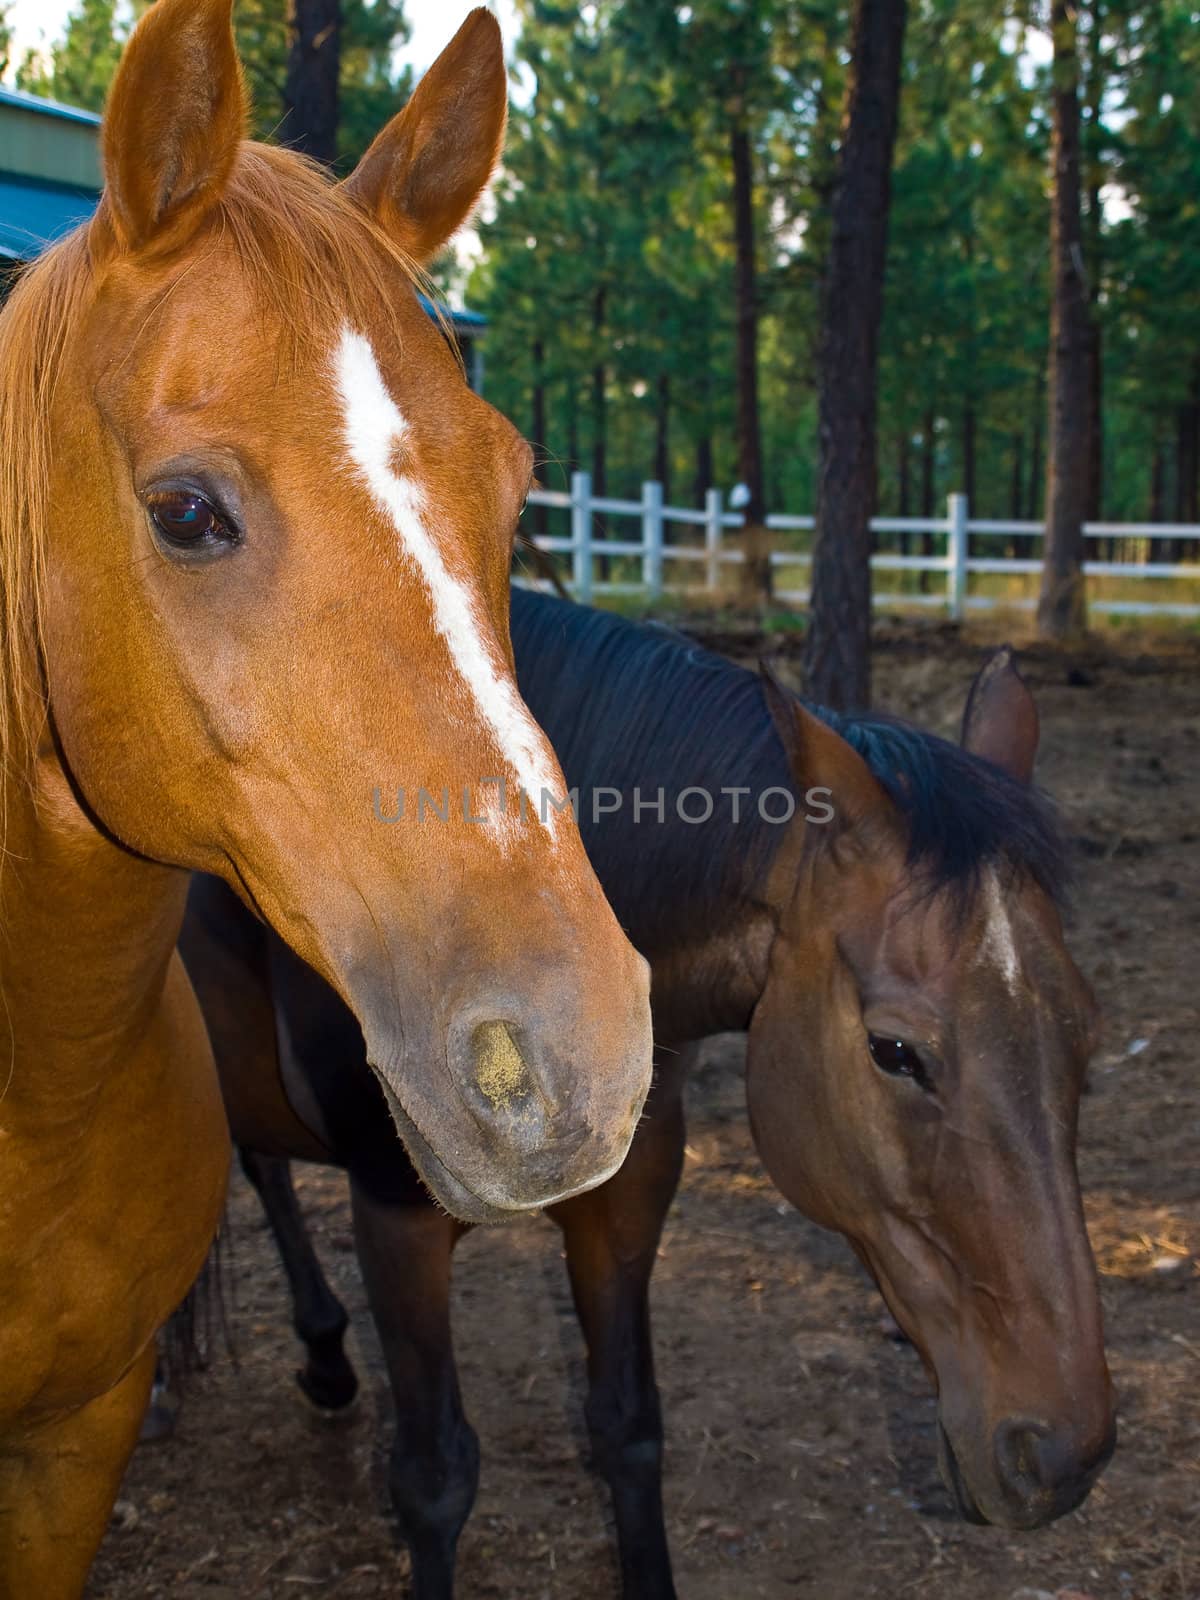 Two Horse Portraits in the Evening Hour by Frankljunior